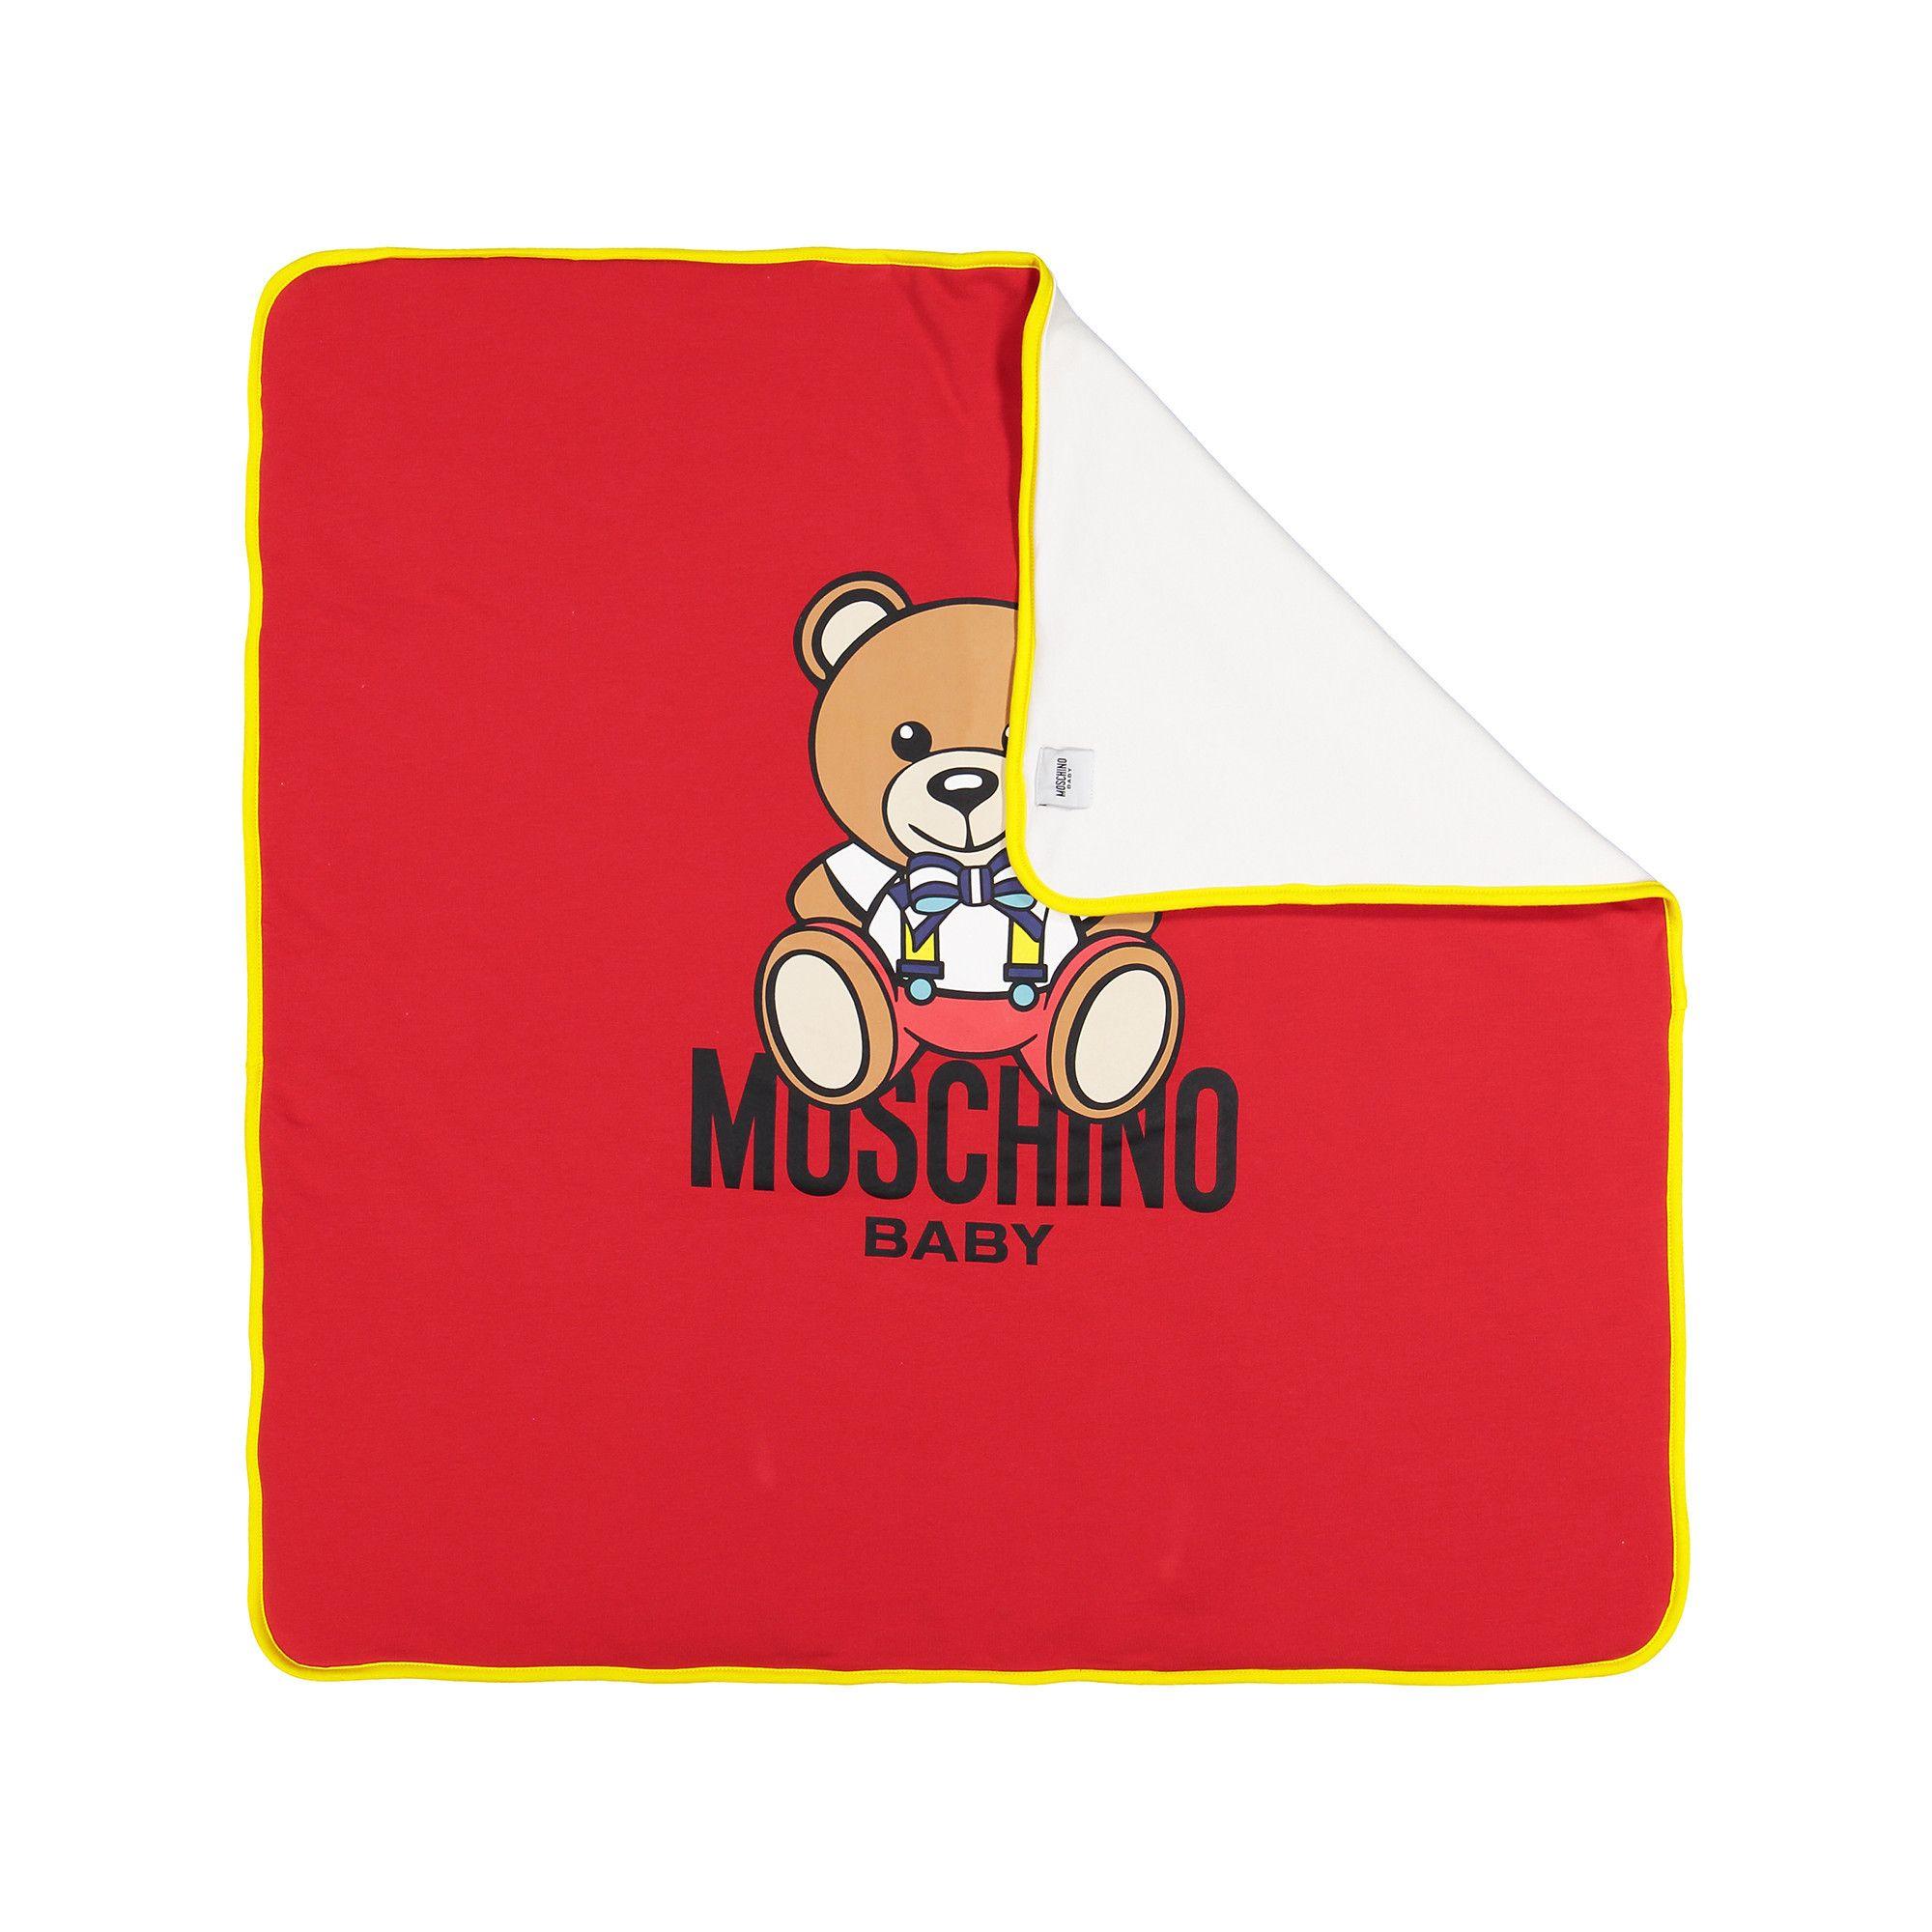 Red and Bear w Logo - Moschino Red Teddy Bear Blanket With Yellow Trim and Logo for Boy+Girls